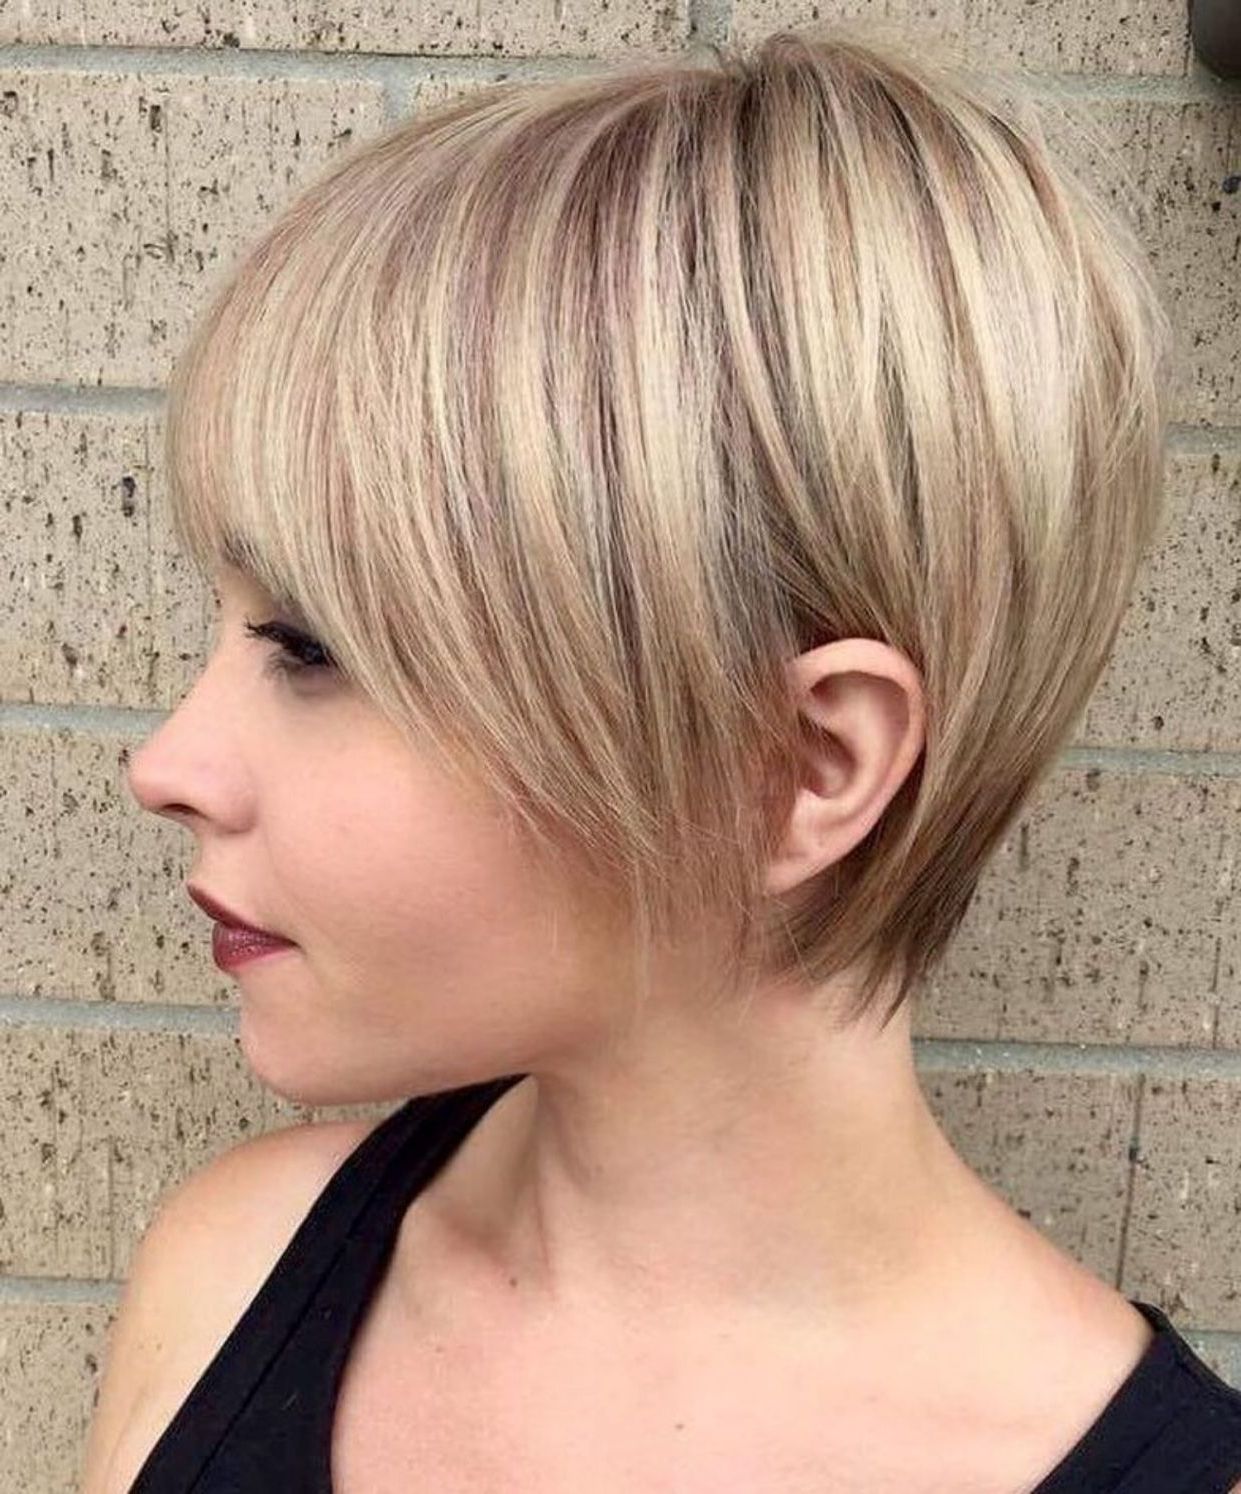 Best And Newest Short Choppy Layers Pixie Bob Hairstyles Regarding 50 Super Cute Looks With Short Hairstyles For Round Faces (View 8 of 20)